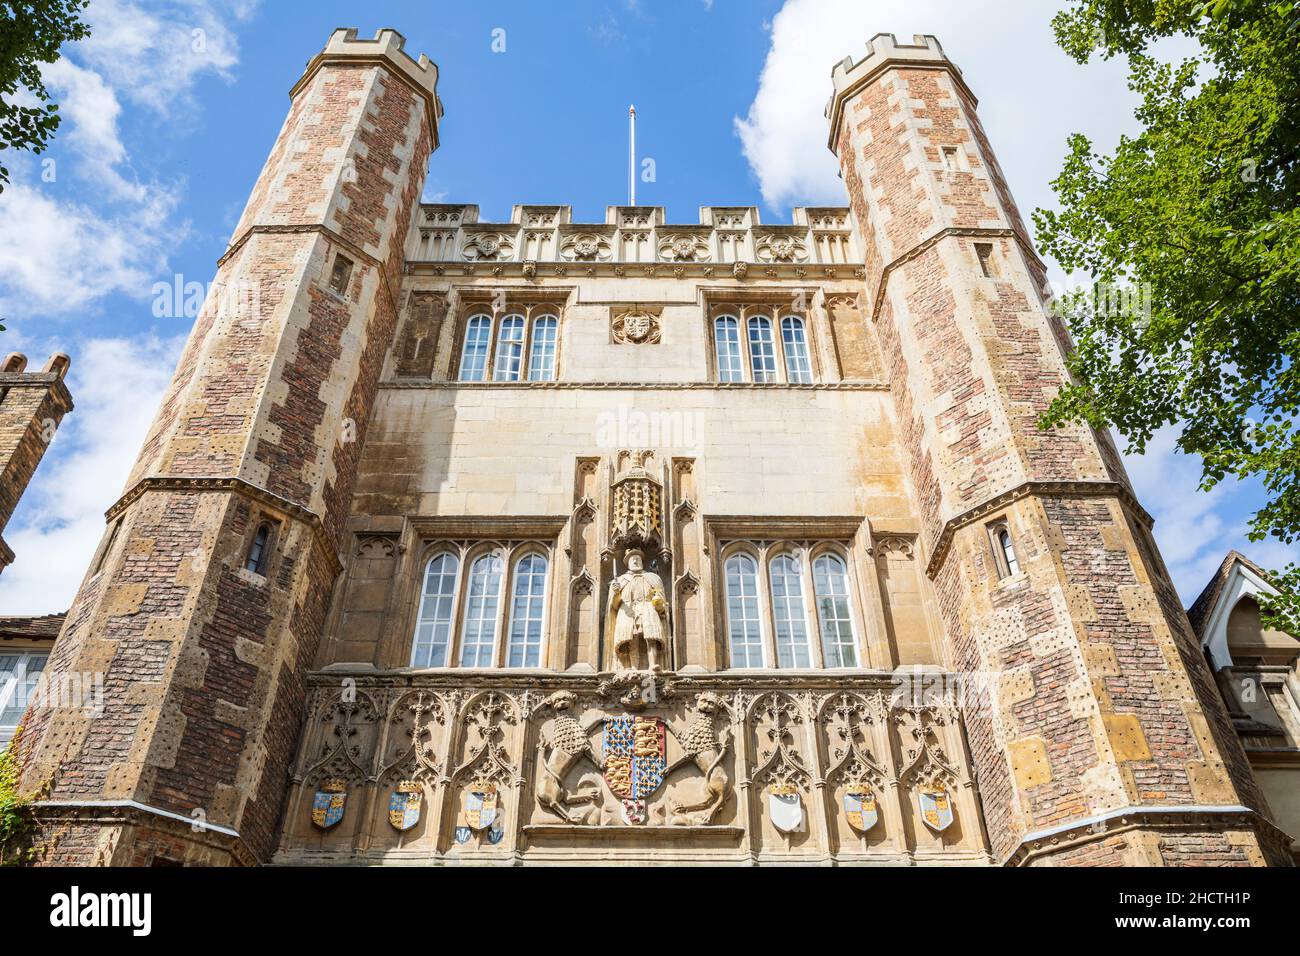 The Great Gate (détail), Trinity College, Cambridge, Angleterre. Banque D'Images